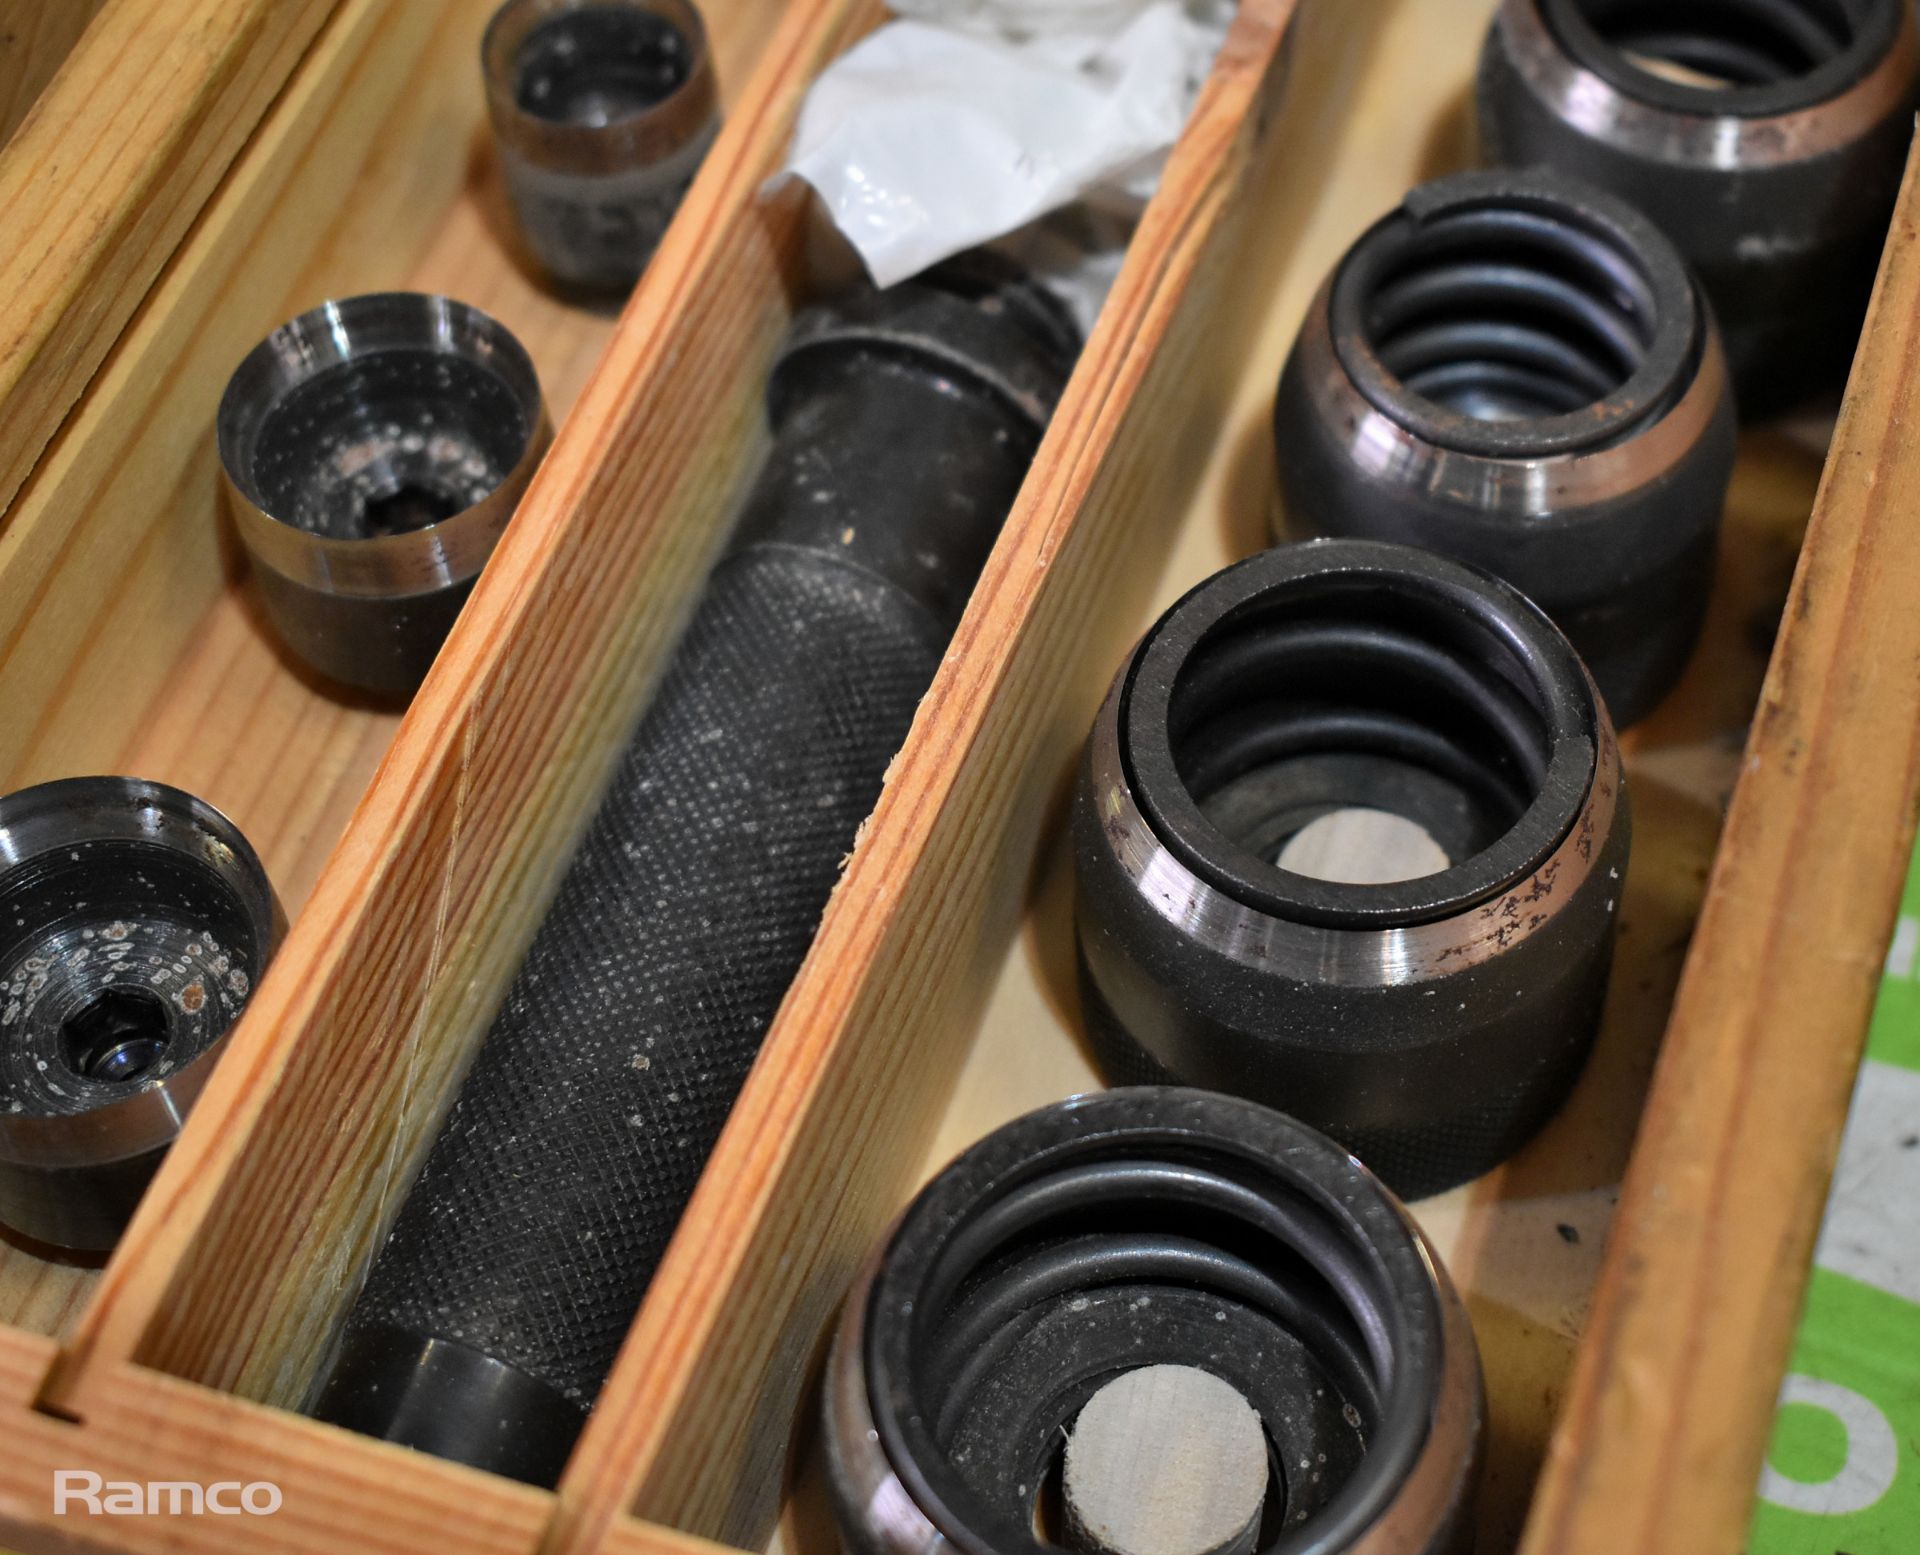 2x Maby Ring punch sets in wooden storage box - Image 6 of 7